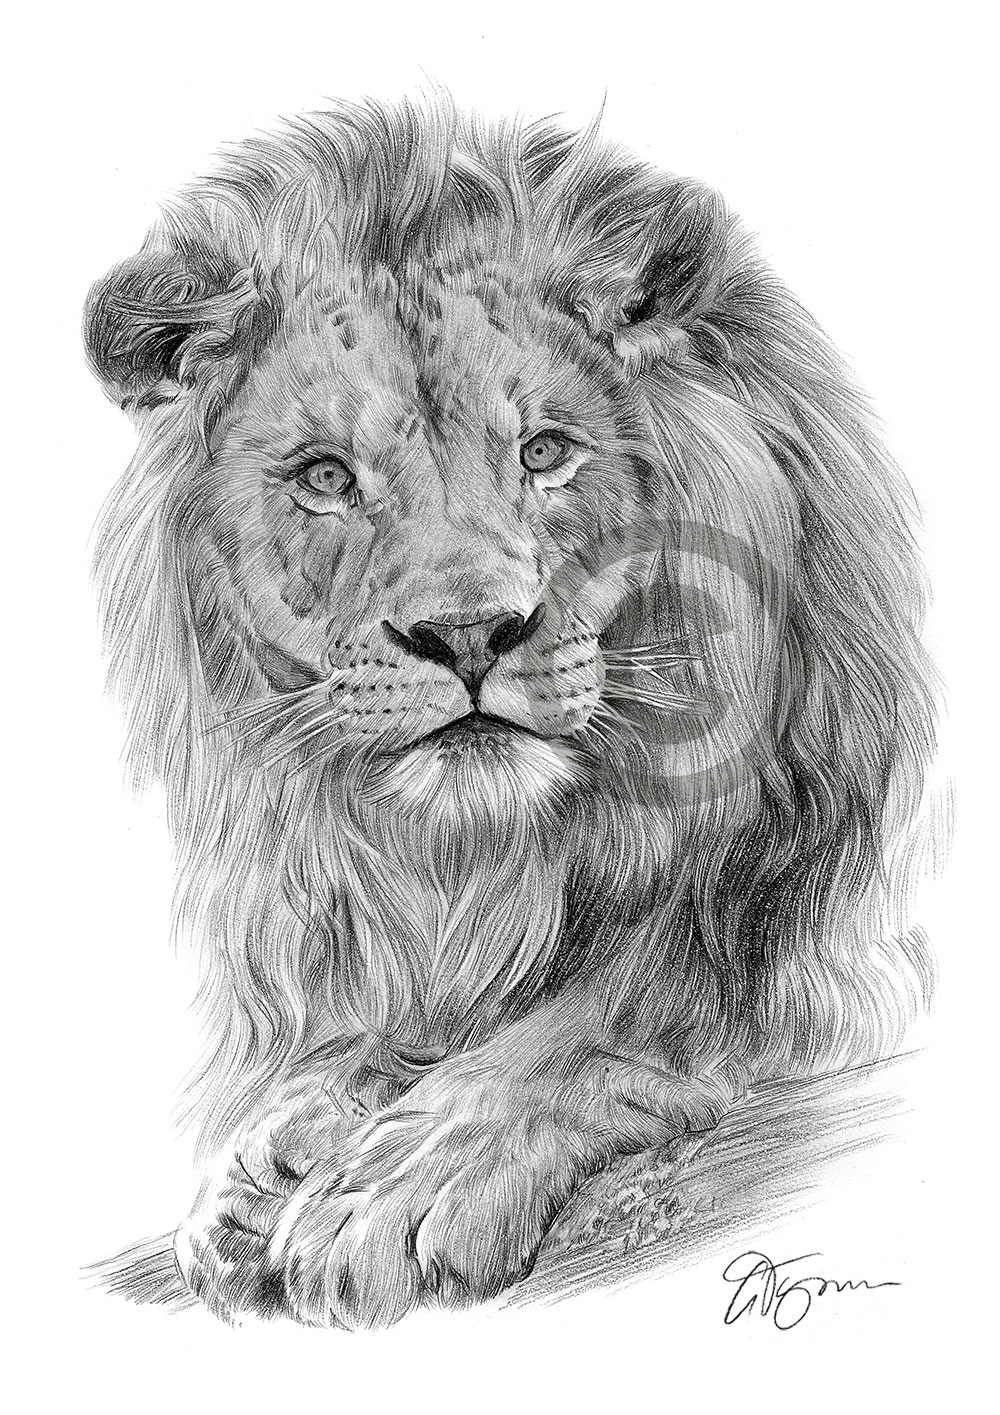 Pencil drawing of a lion by artist Gary Tymon